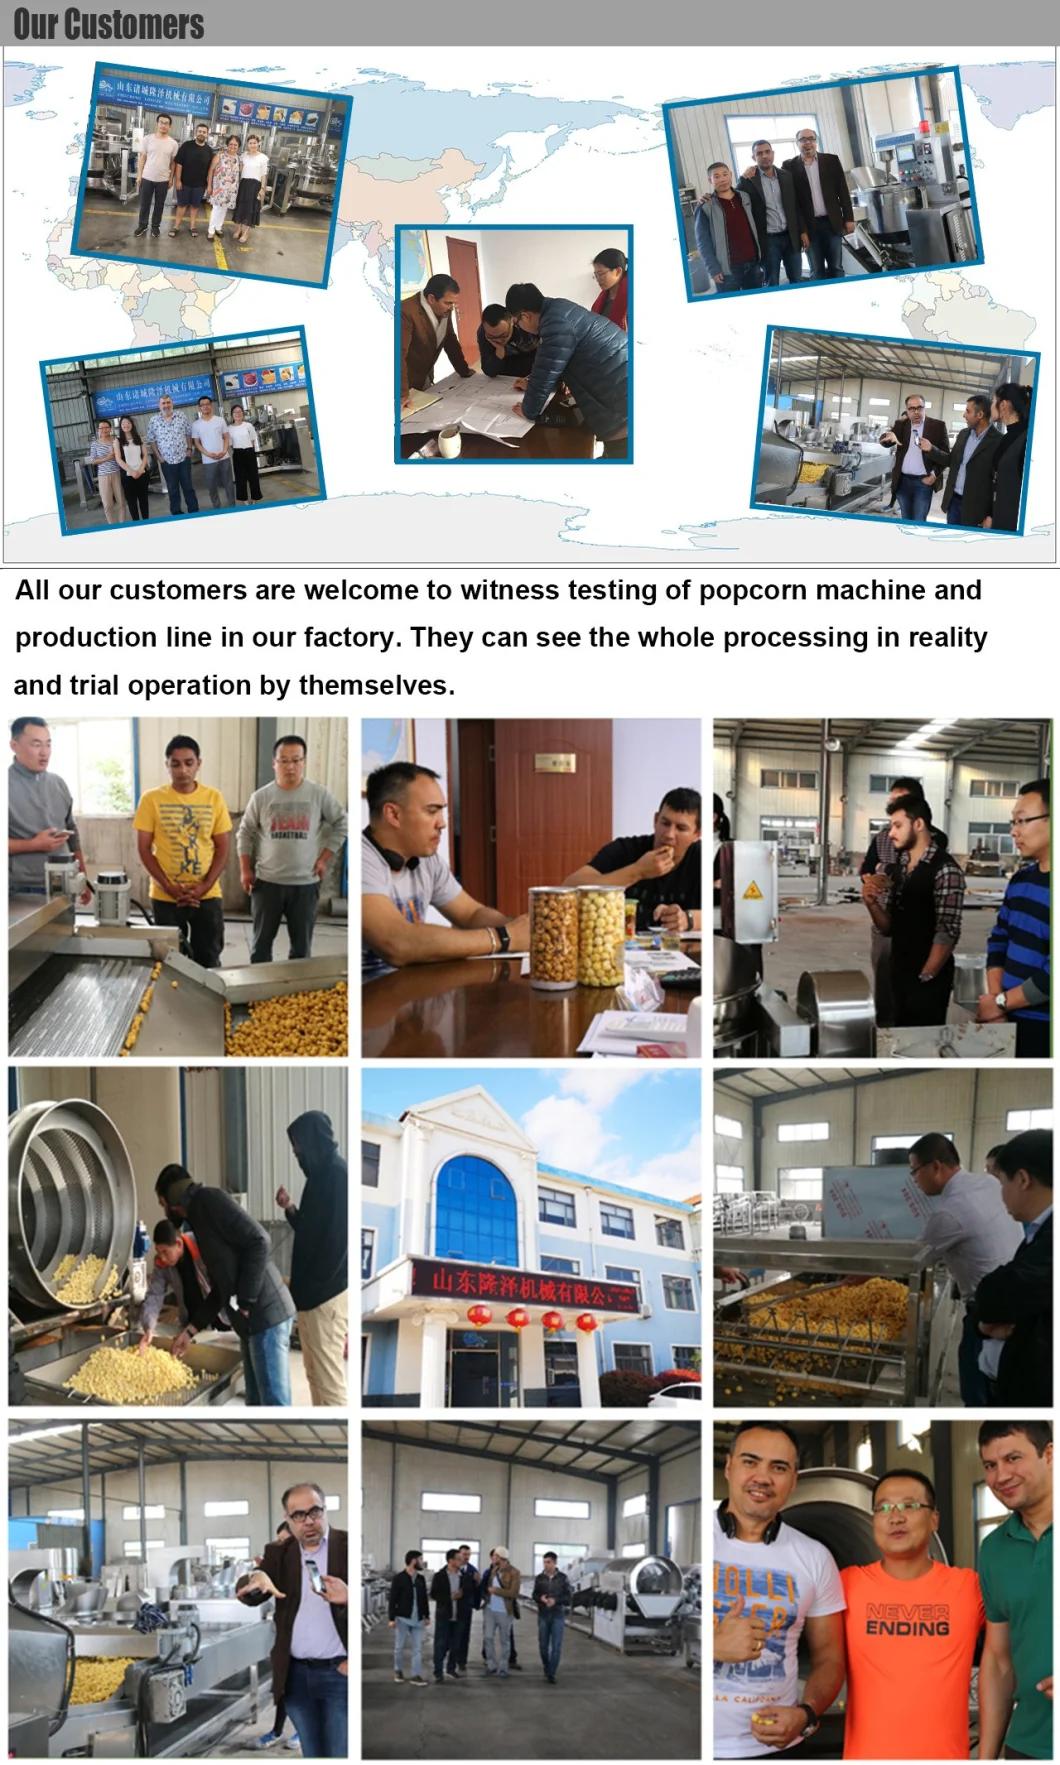 Large Output Automatic Gas Heated Industrial Popcorn Making Machine with Factory Price